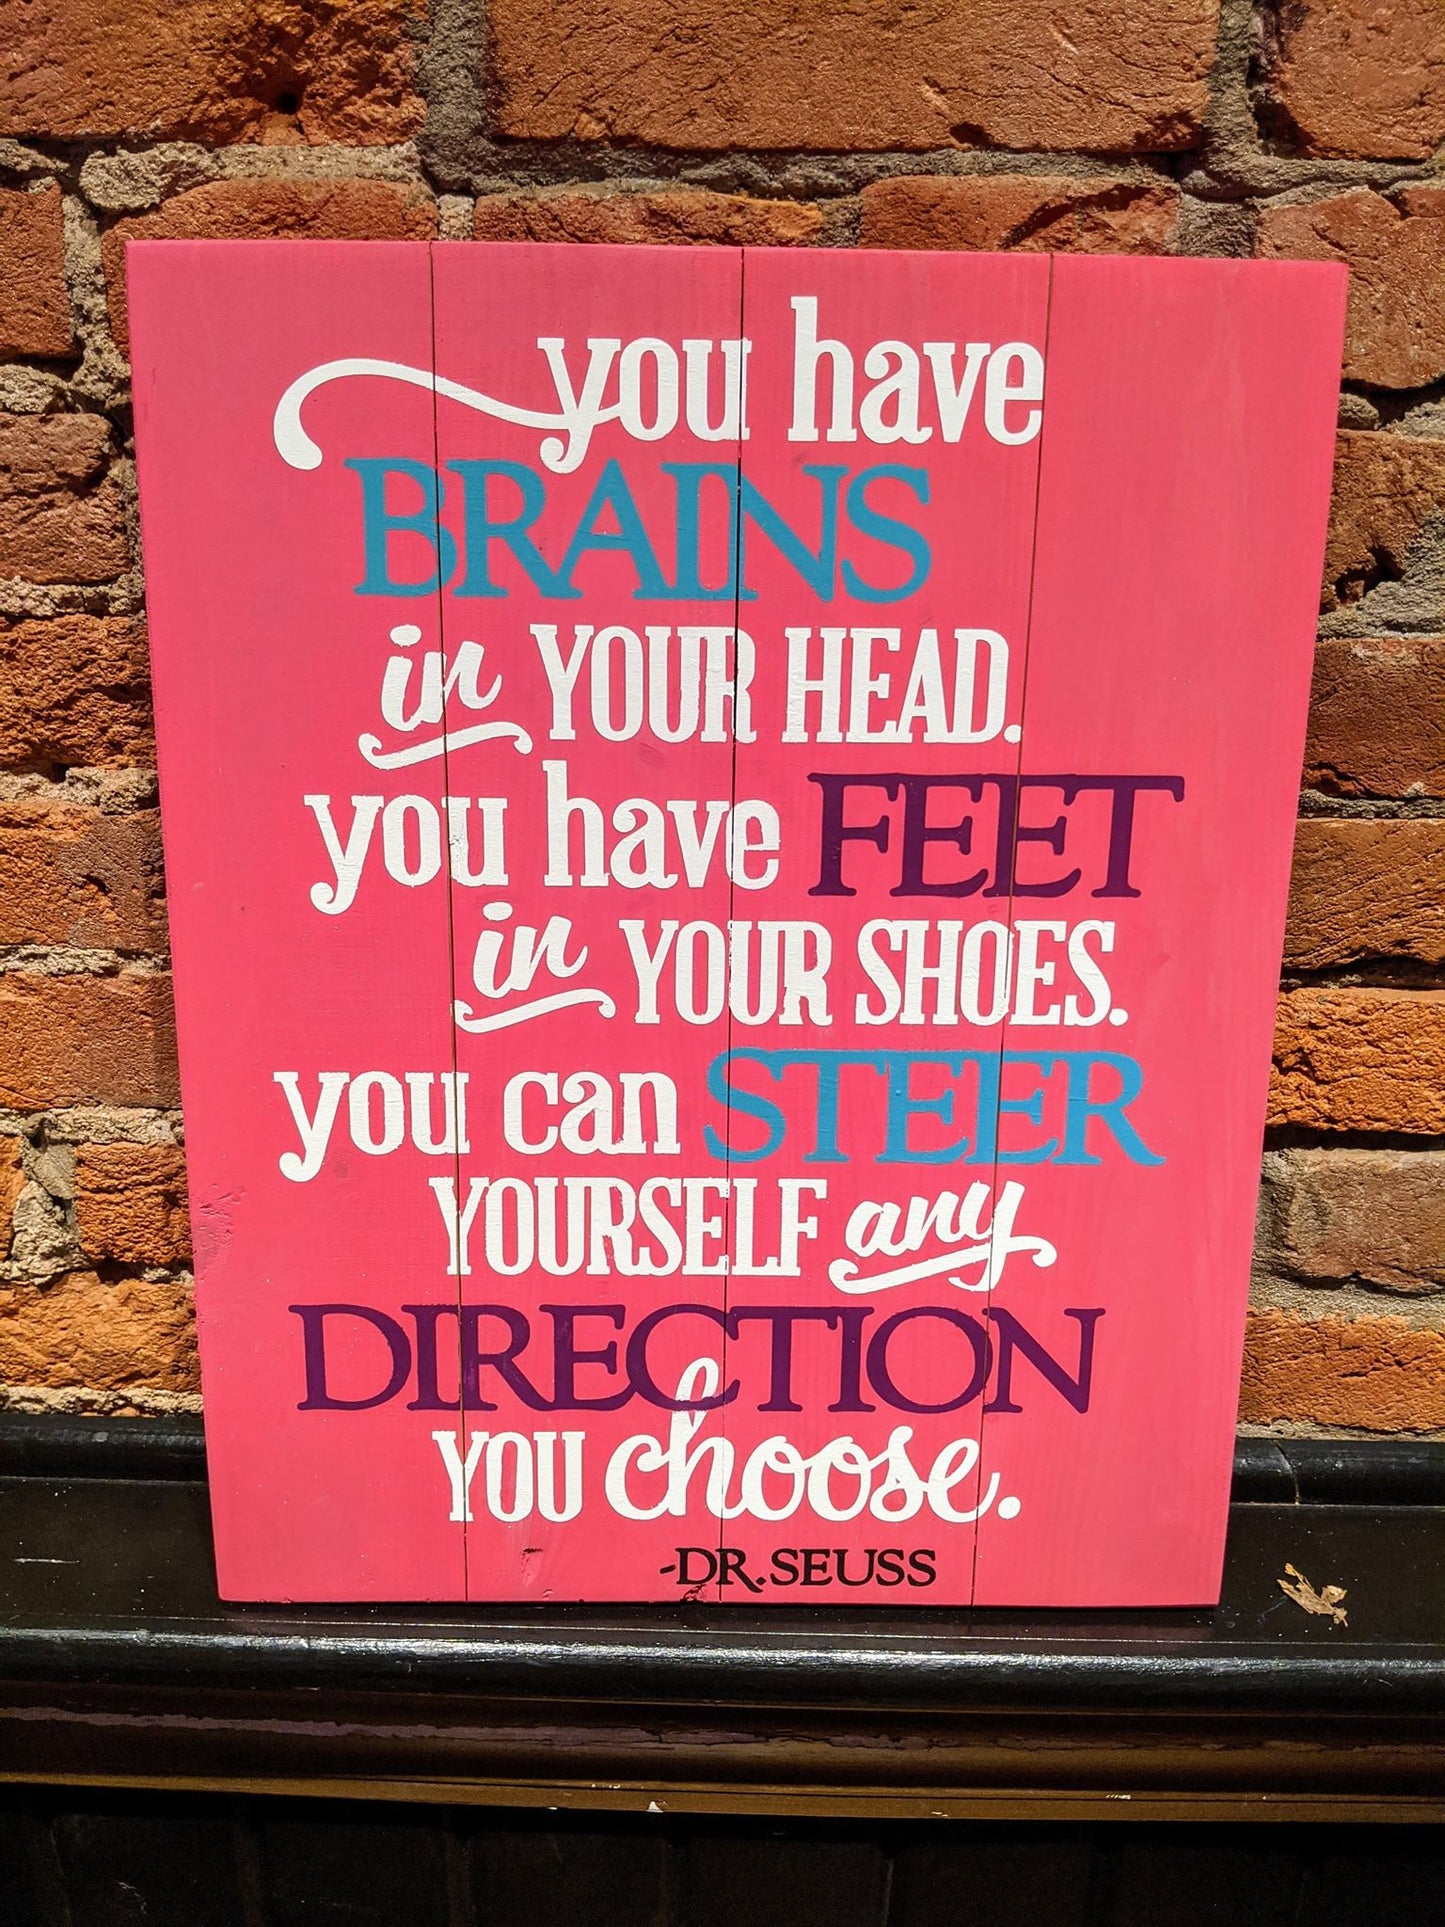 You have brains in your head, you have feet in your shoes, you can steer yourself any direction you choose